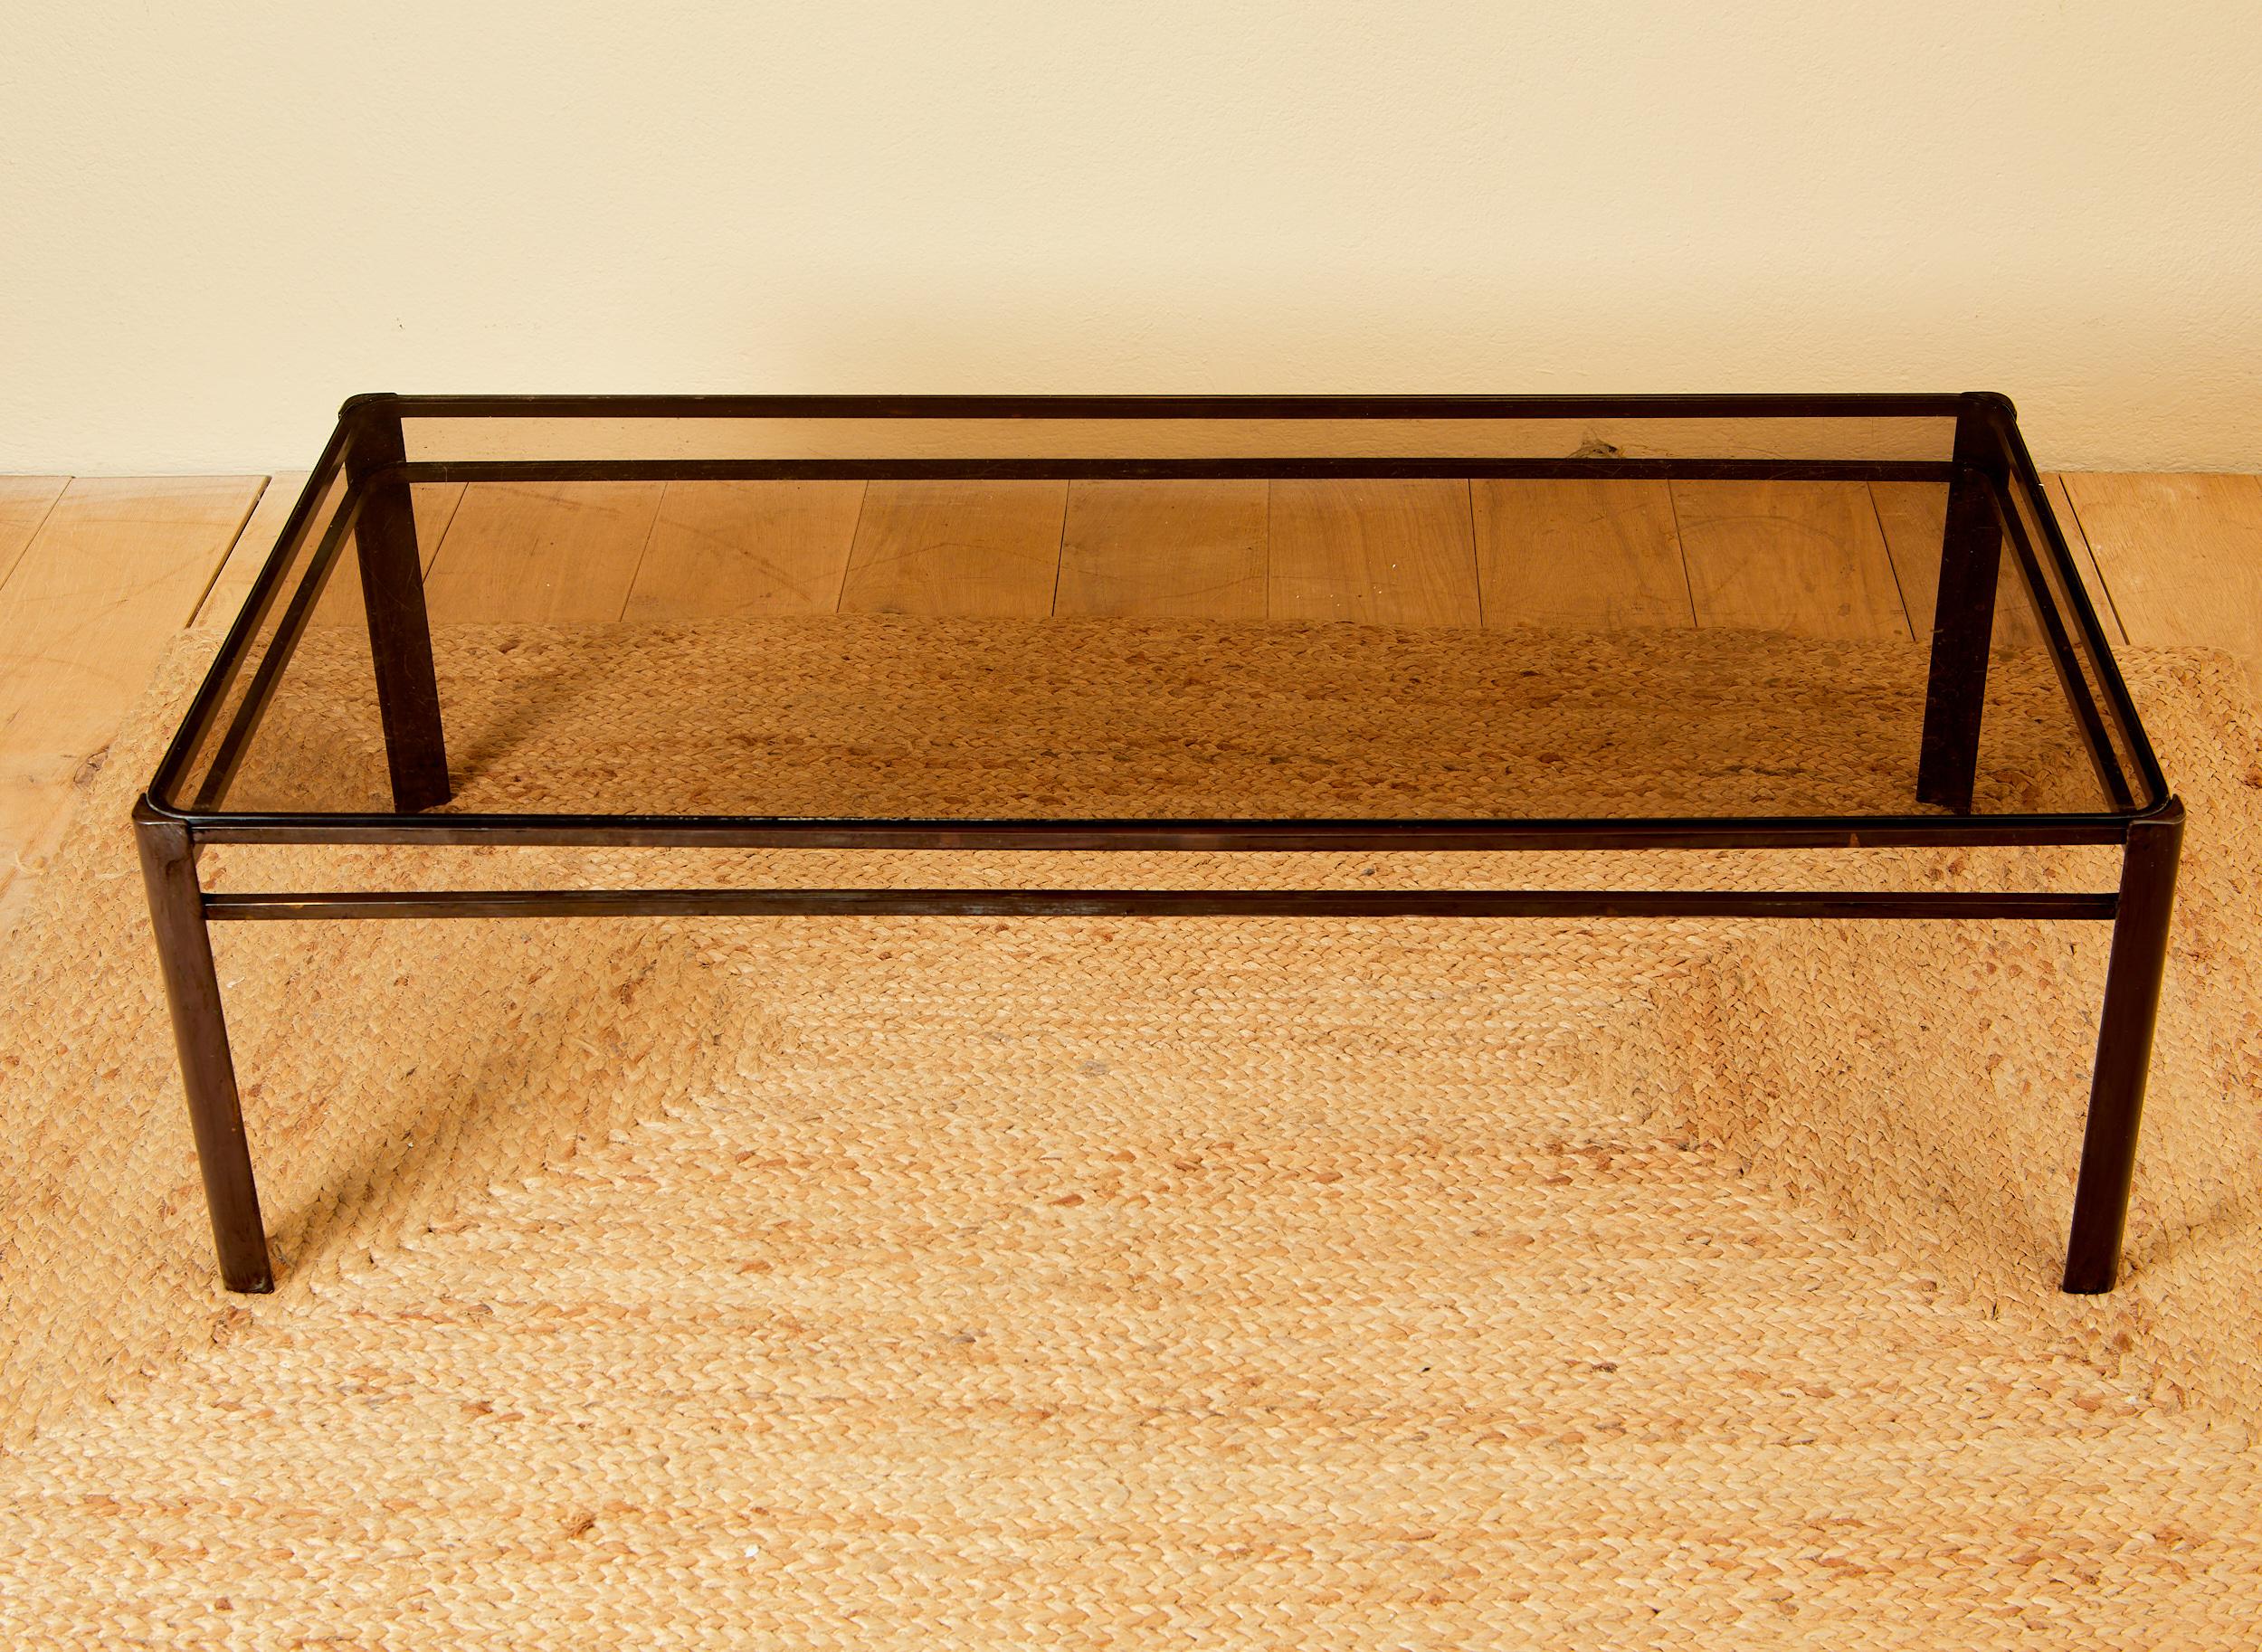 Late 20th Century Jacques Quinet for Mallabert, coffee table, bronze, circa 1970, France.